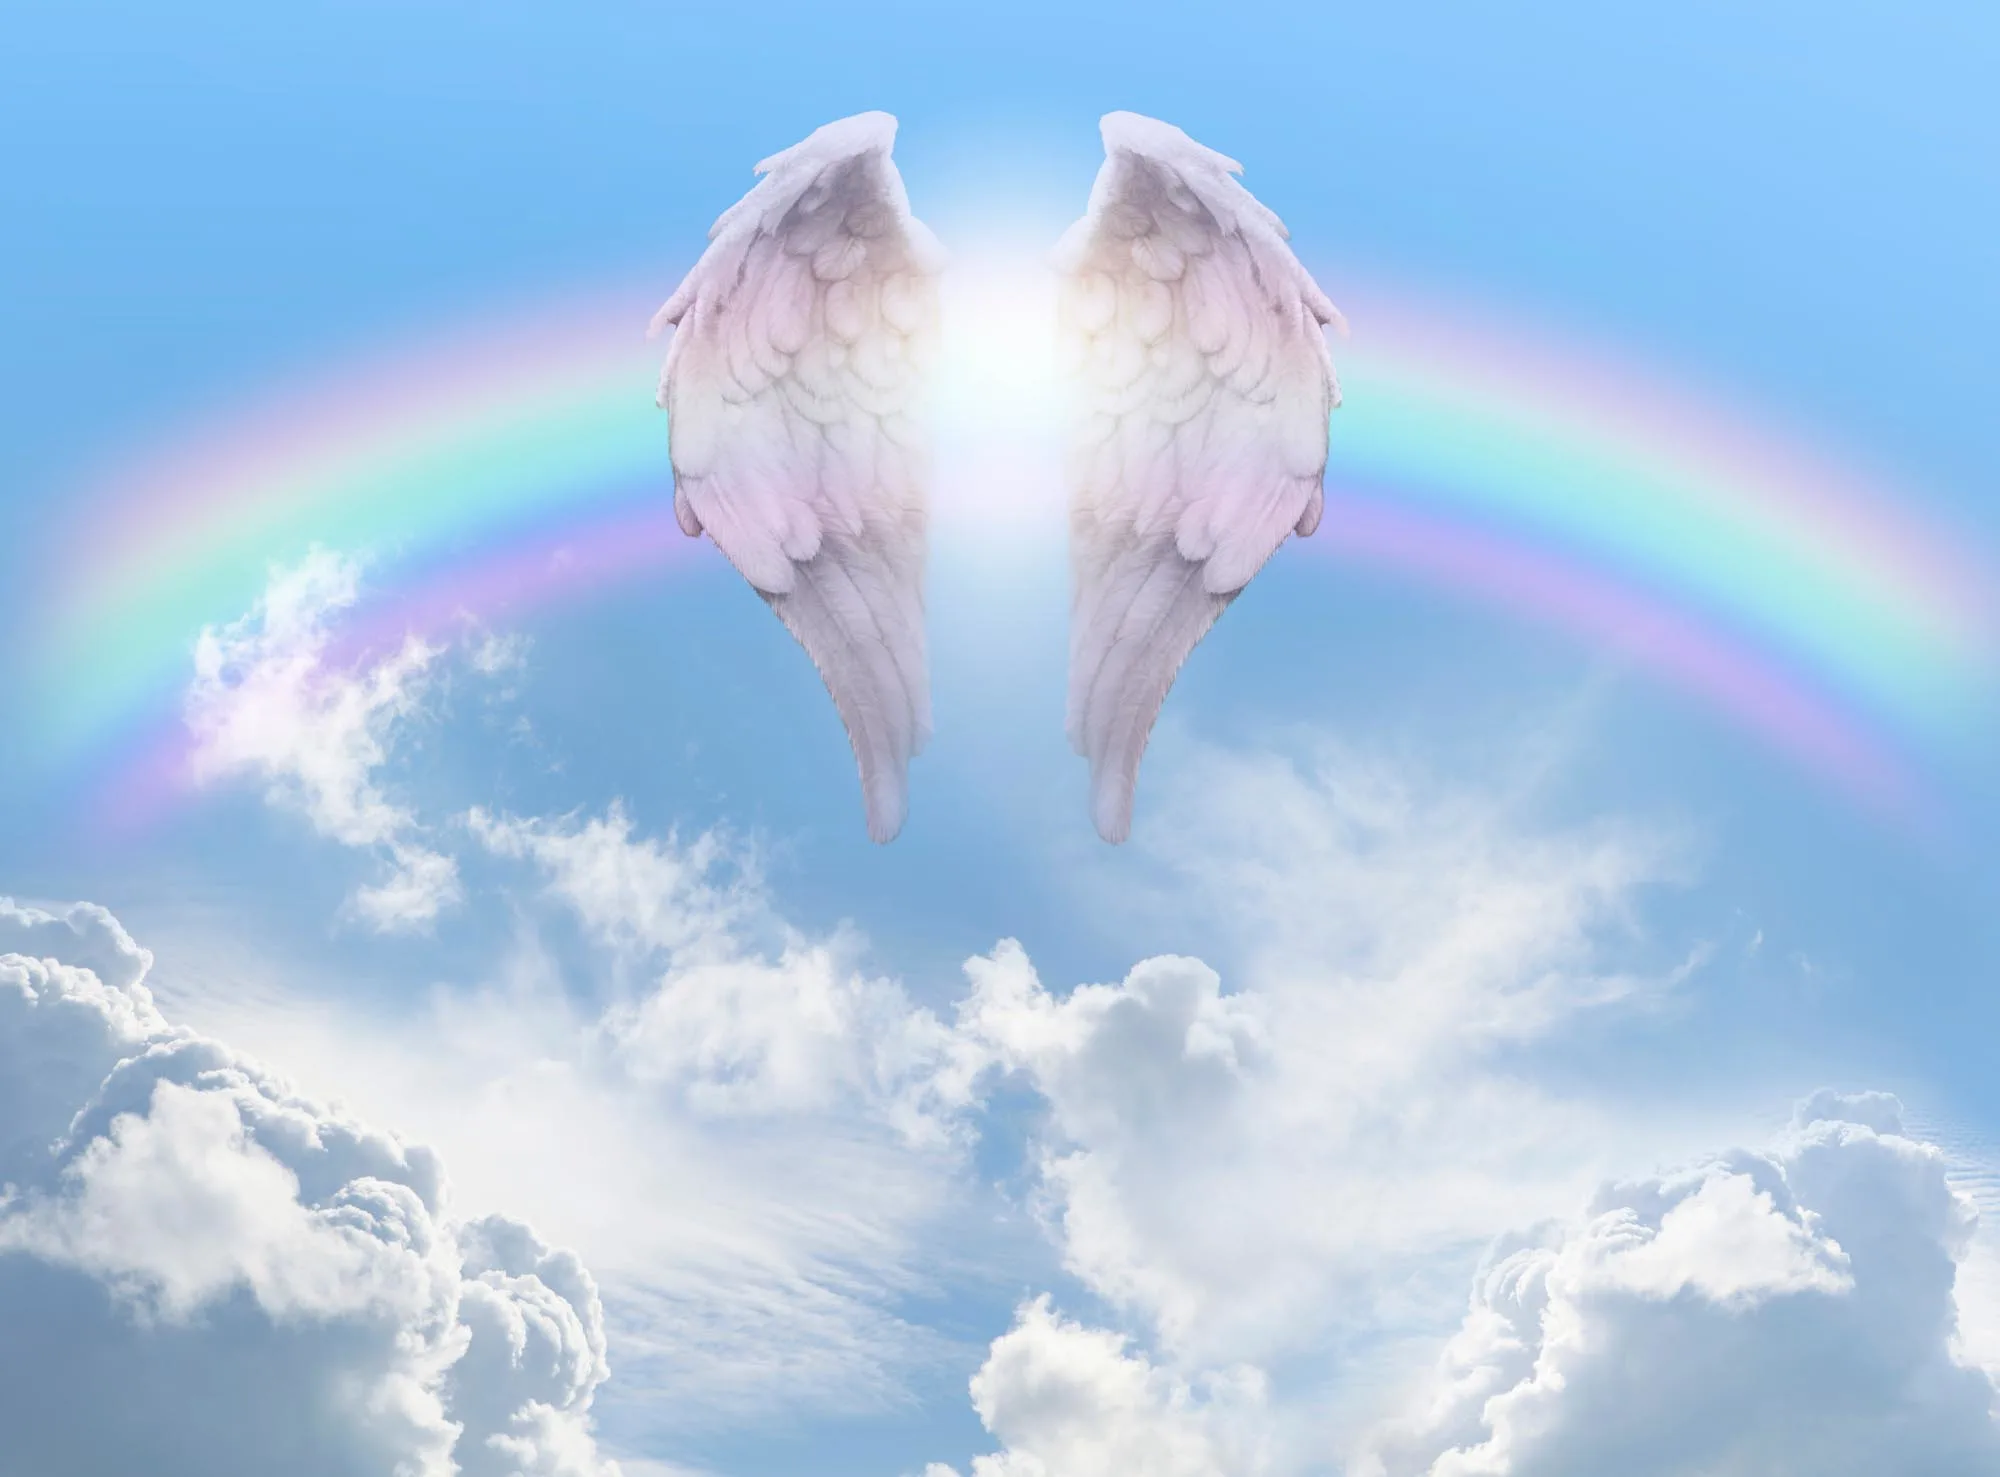 Pair of angel wings in front of a rainbow arc against a beautiful blue sky